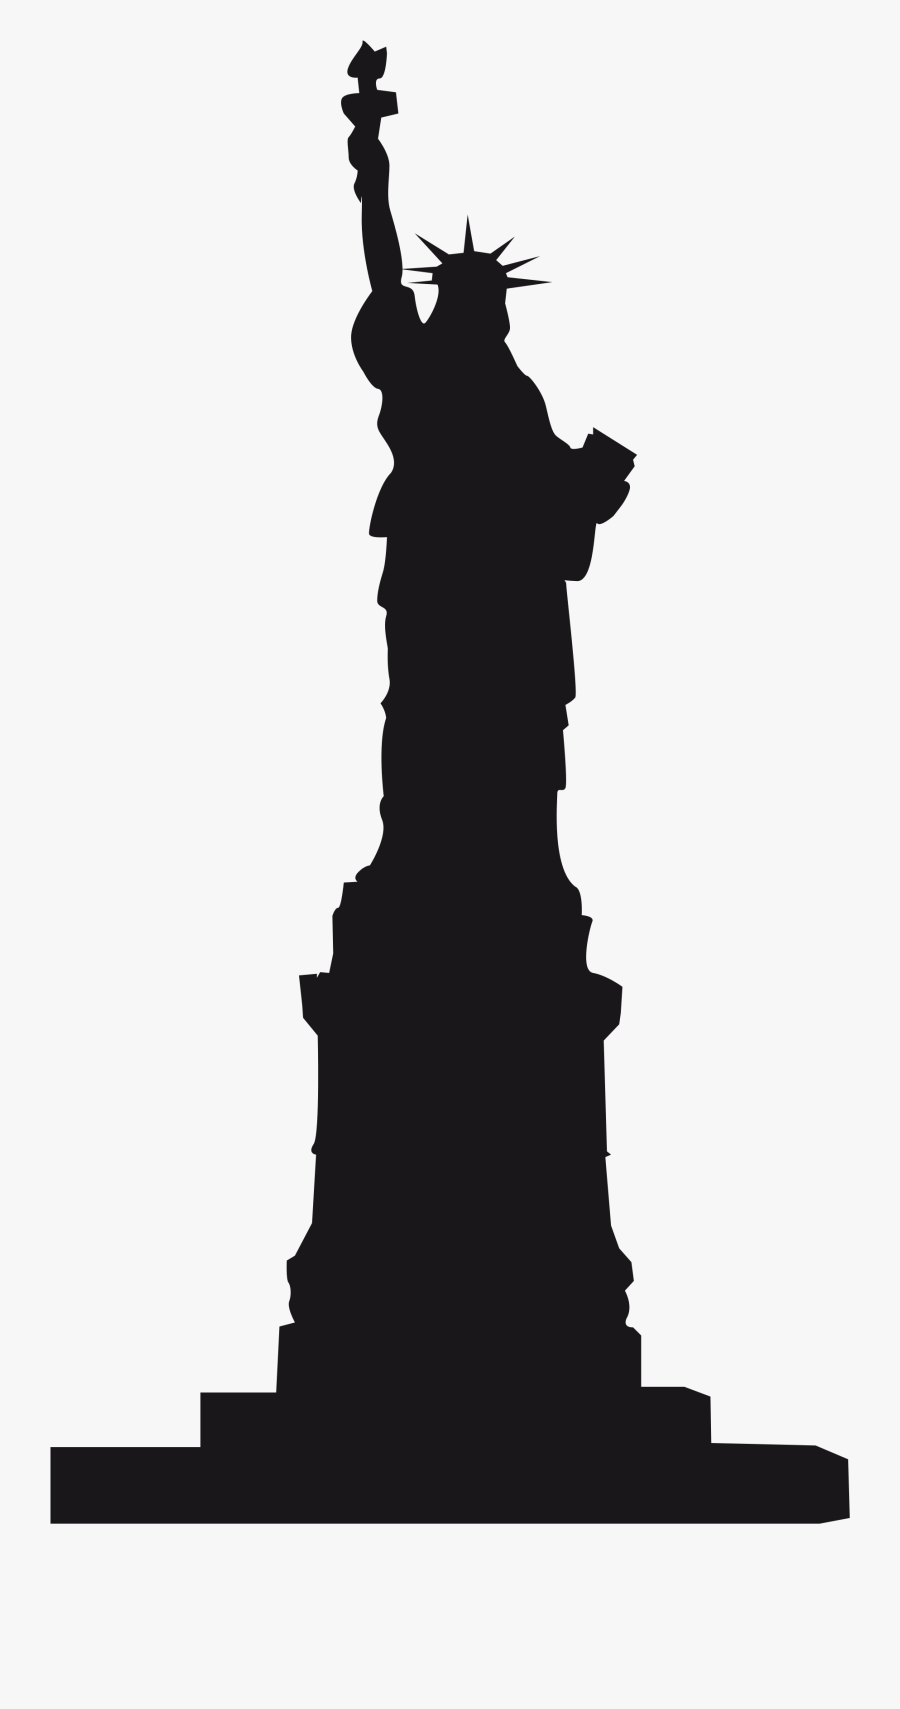 Silhouette Of The Statue Of Liberty In New York - Statue Of Liberty, Transparent Clipart